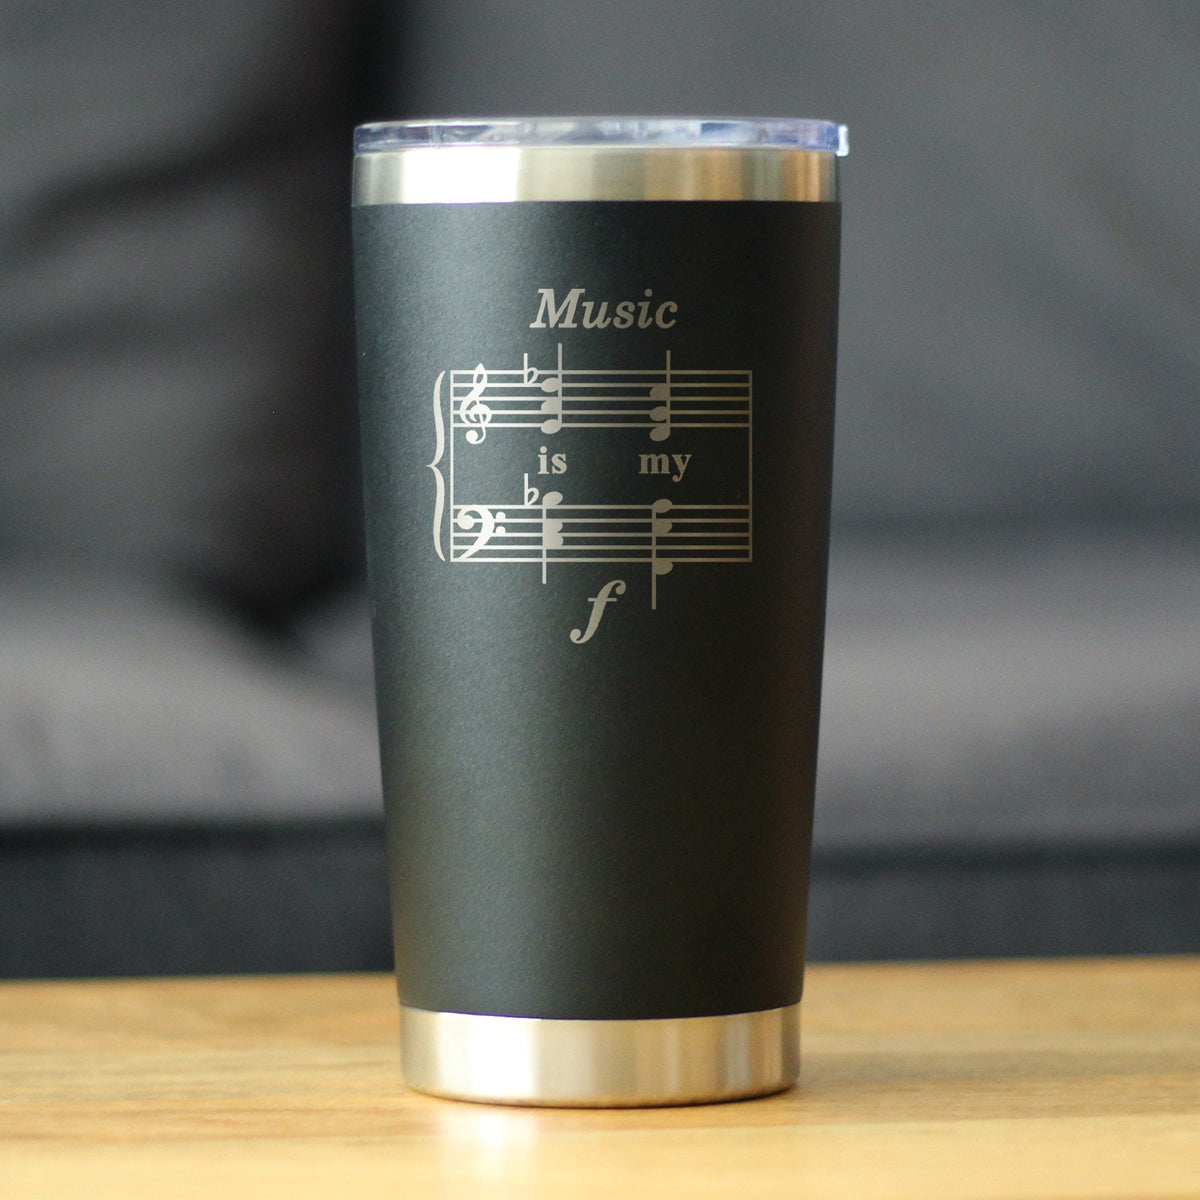 Music is My Forte - Insulated Coffee Tumbler Cup with Sliding Lid - Stainless Steel Mug - Unique Funny Musician Gifts and Musical Accessories